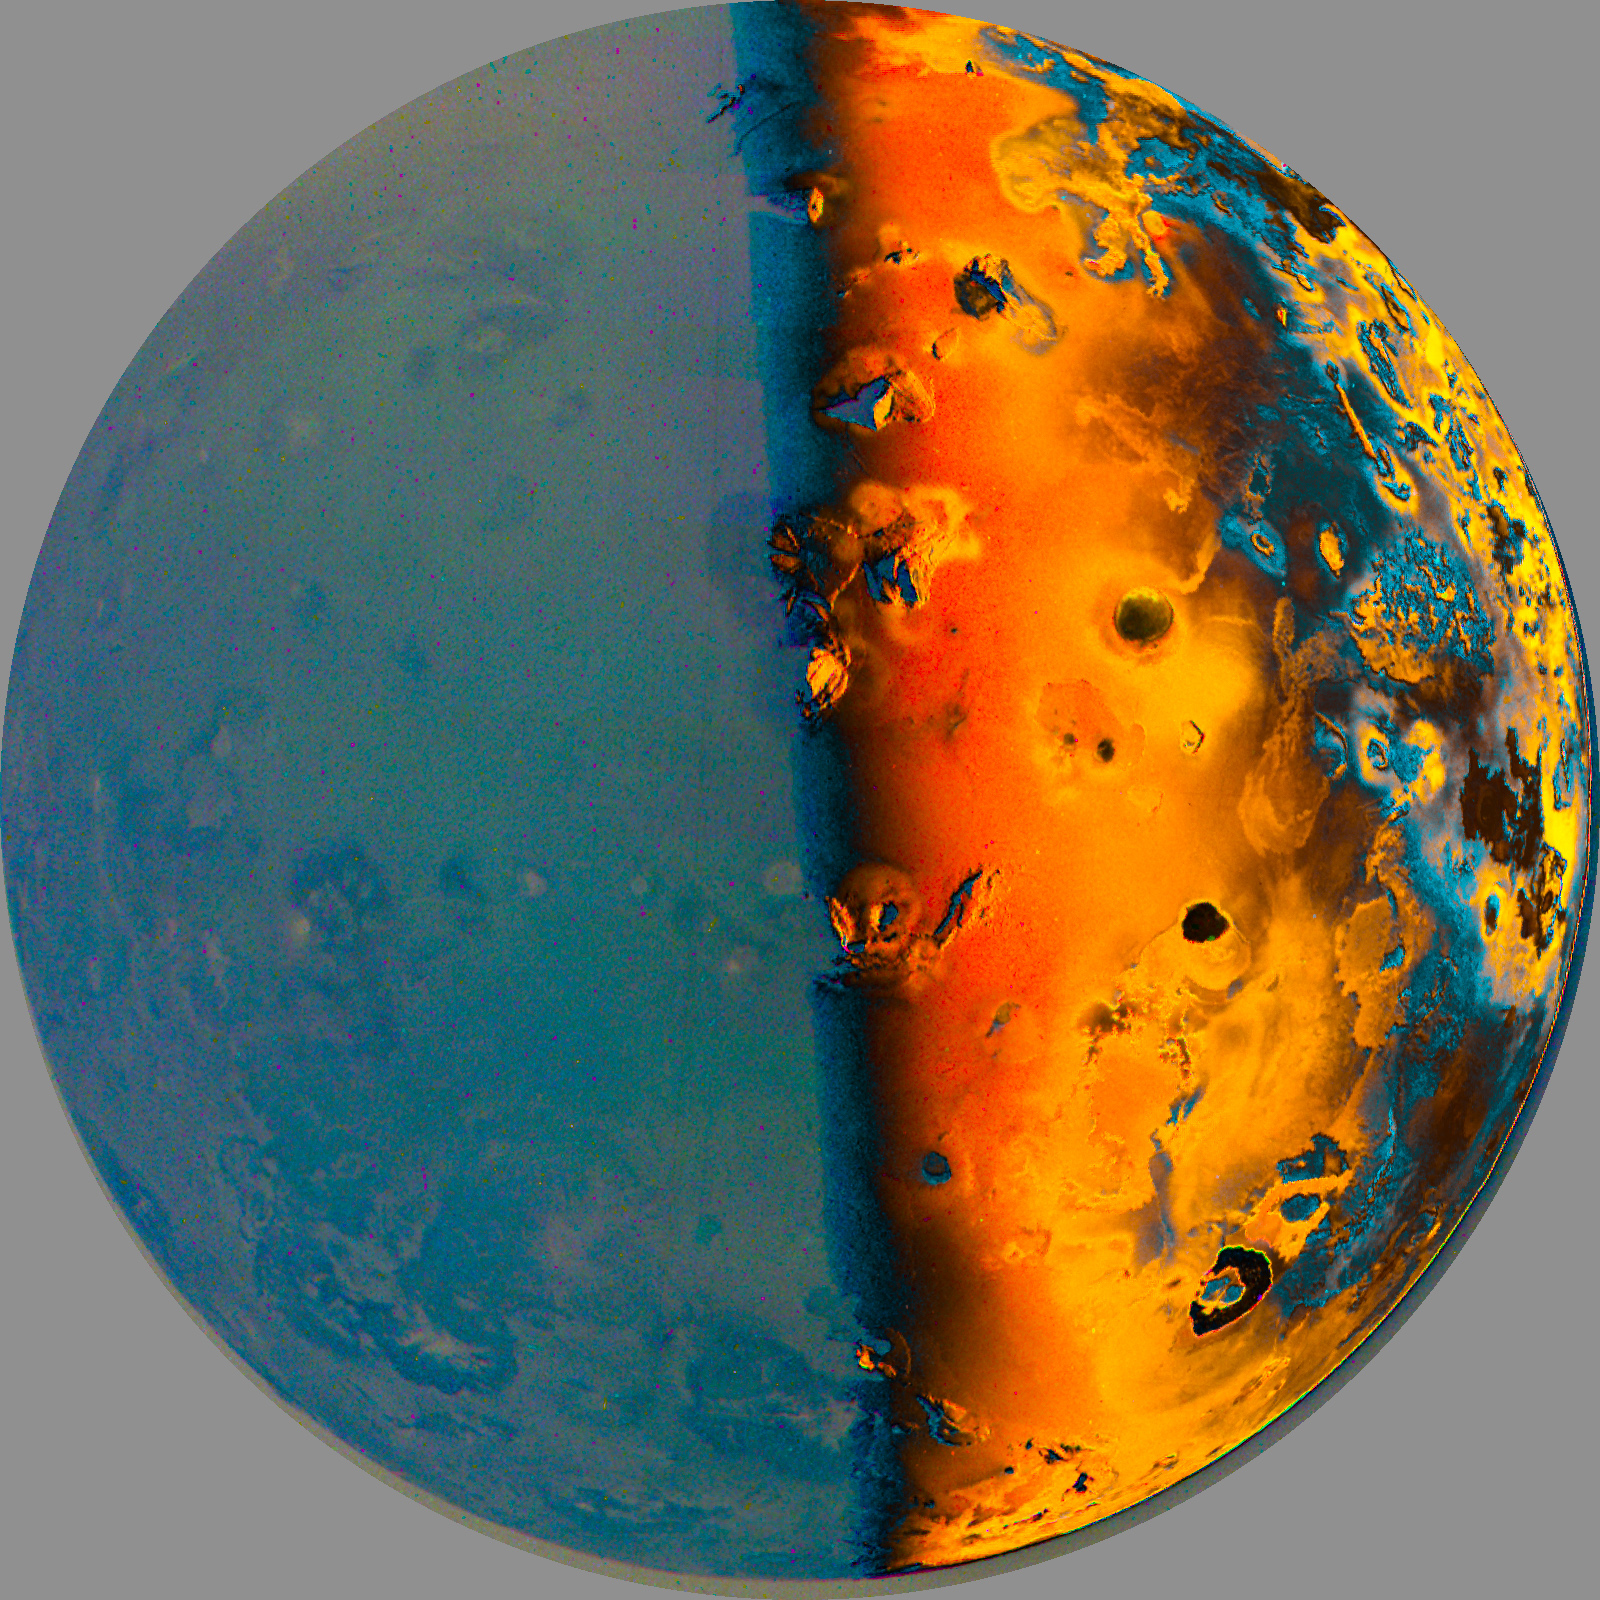 An image of a blue and orange planet.